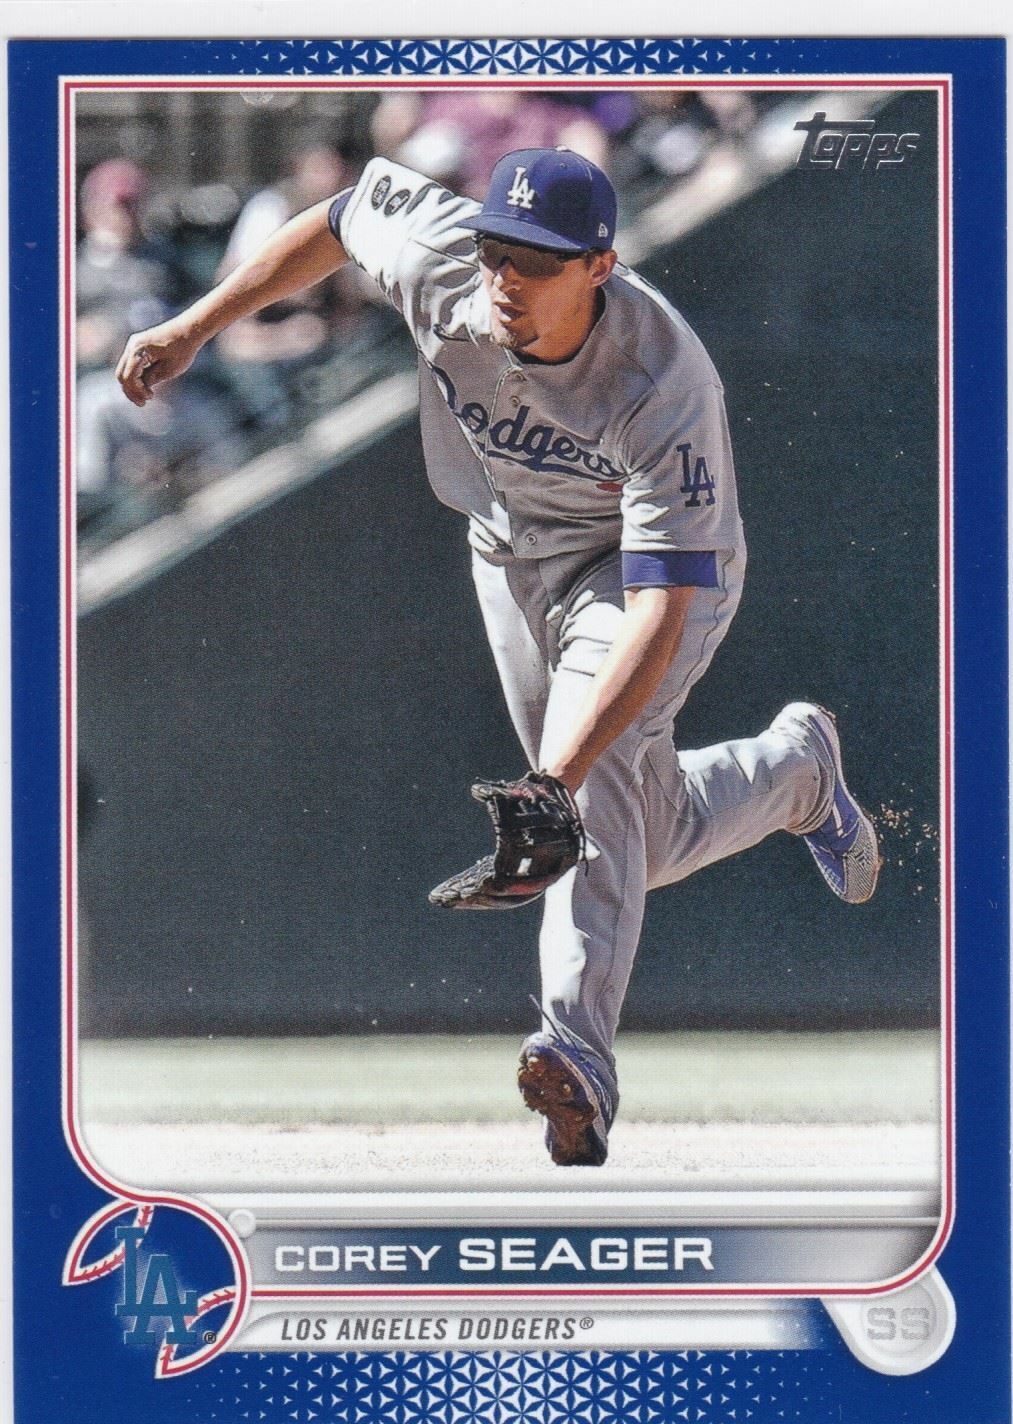 Corey Seager 2022 Topps Royal Blue Series Mint Card #301